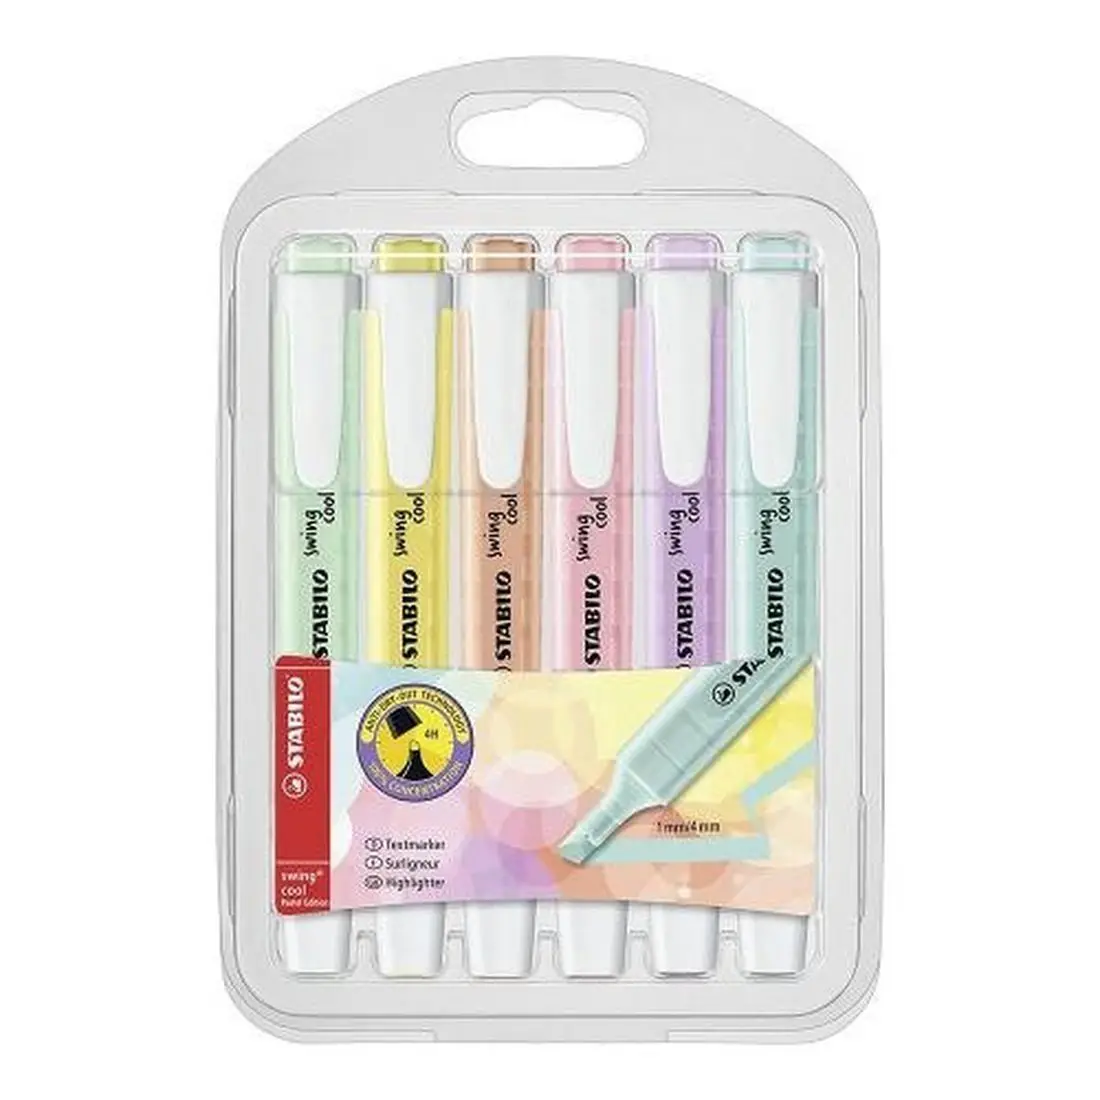 Stabilo Swing Cool 6 Pcs Pastel Marking Pen With Practical Clip And Flat Design, Water-based Ink Suitable for Use on Pocket-size